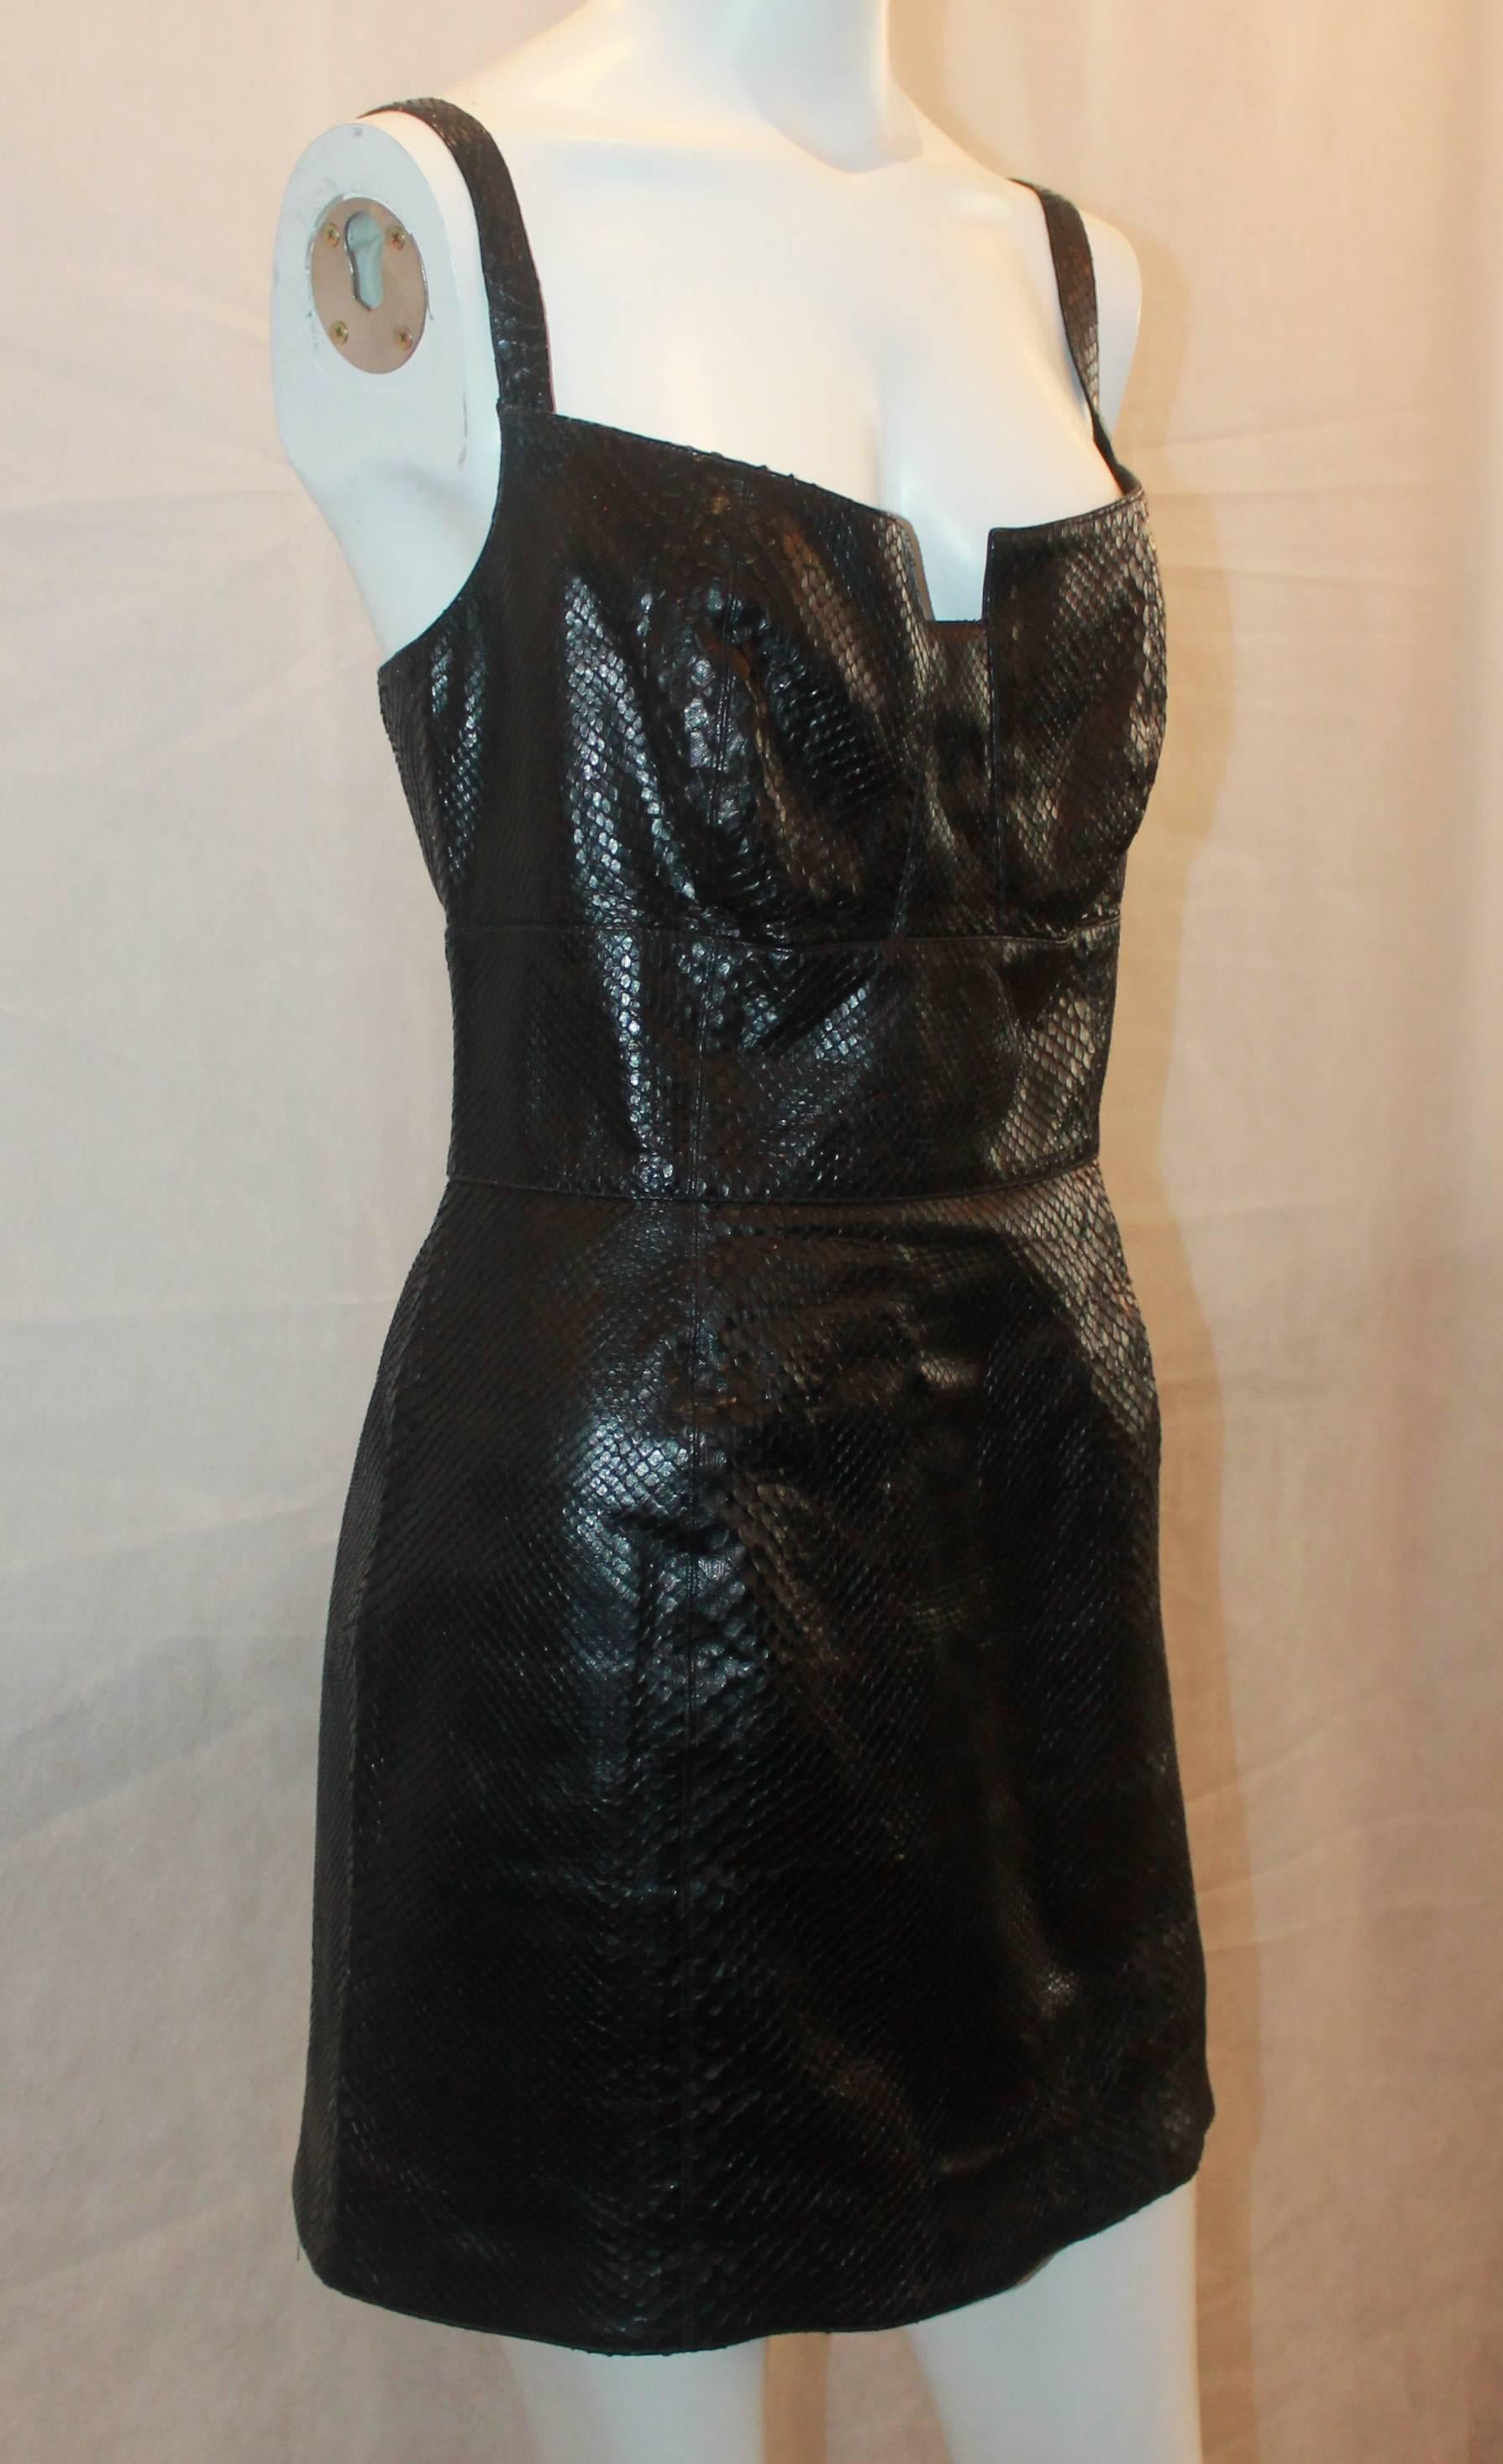 Claude Montana Por Ideal Cuir Vintage Black Snakeskin Spaghetti Strap Dress - 40.  This dress is in good condition with only minor lifting of the snake scales.  It features a striking black snakeskin, spaghetti straps, a shapely style on the bust